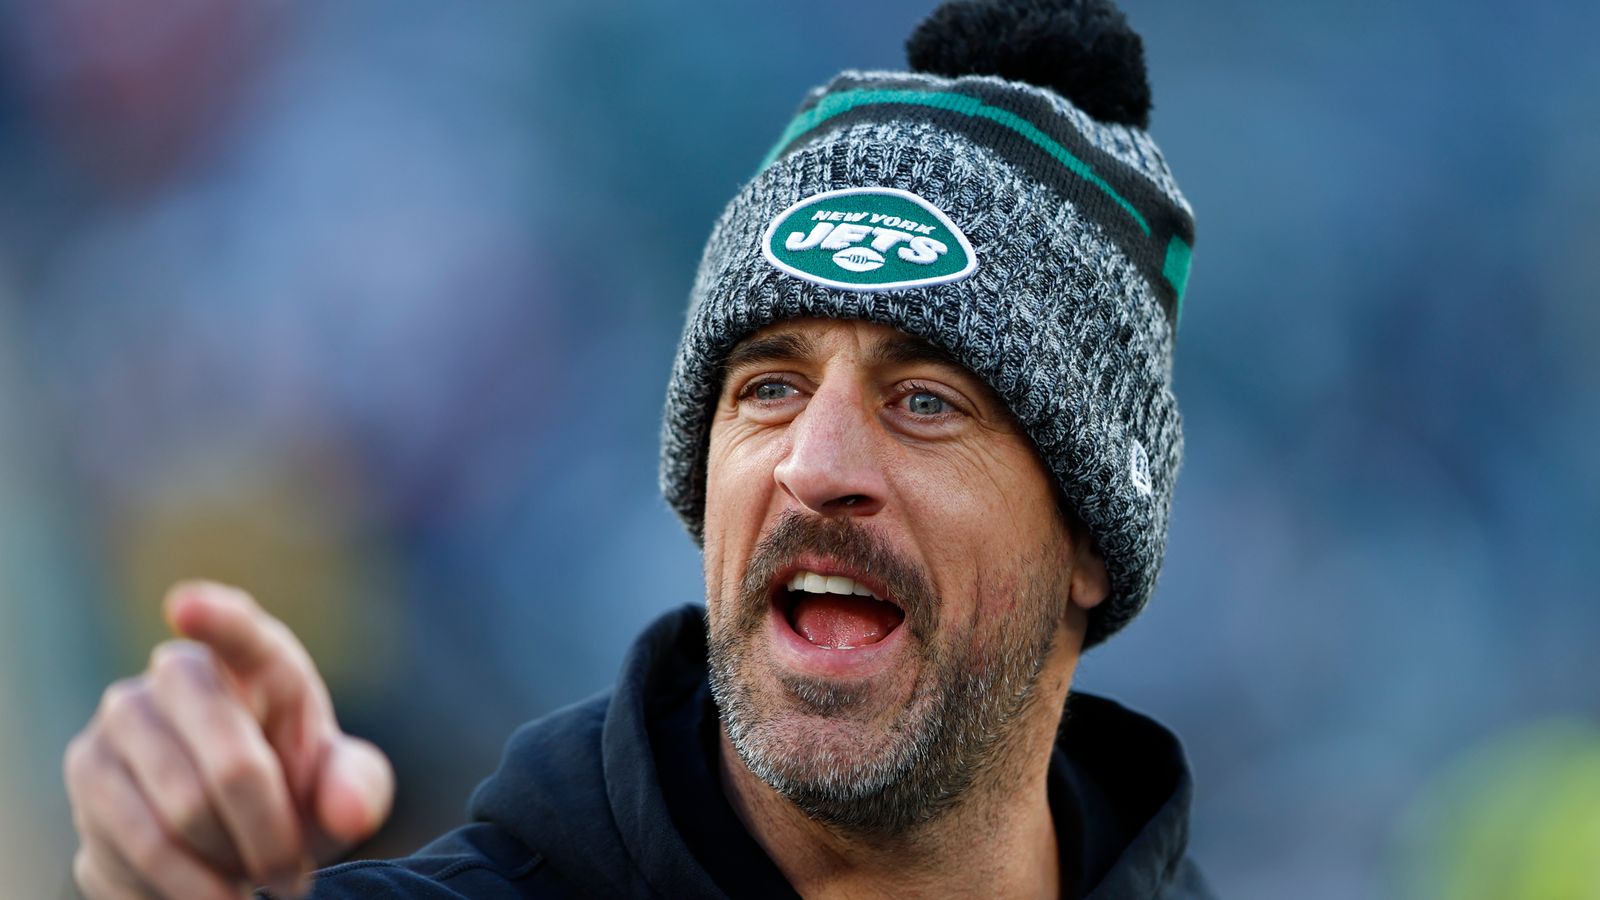 Aaron Rodgers: New York Jets quarterback set for return to practice after torn Achilles | NFL News